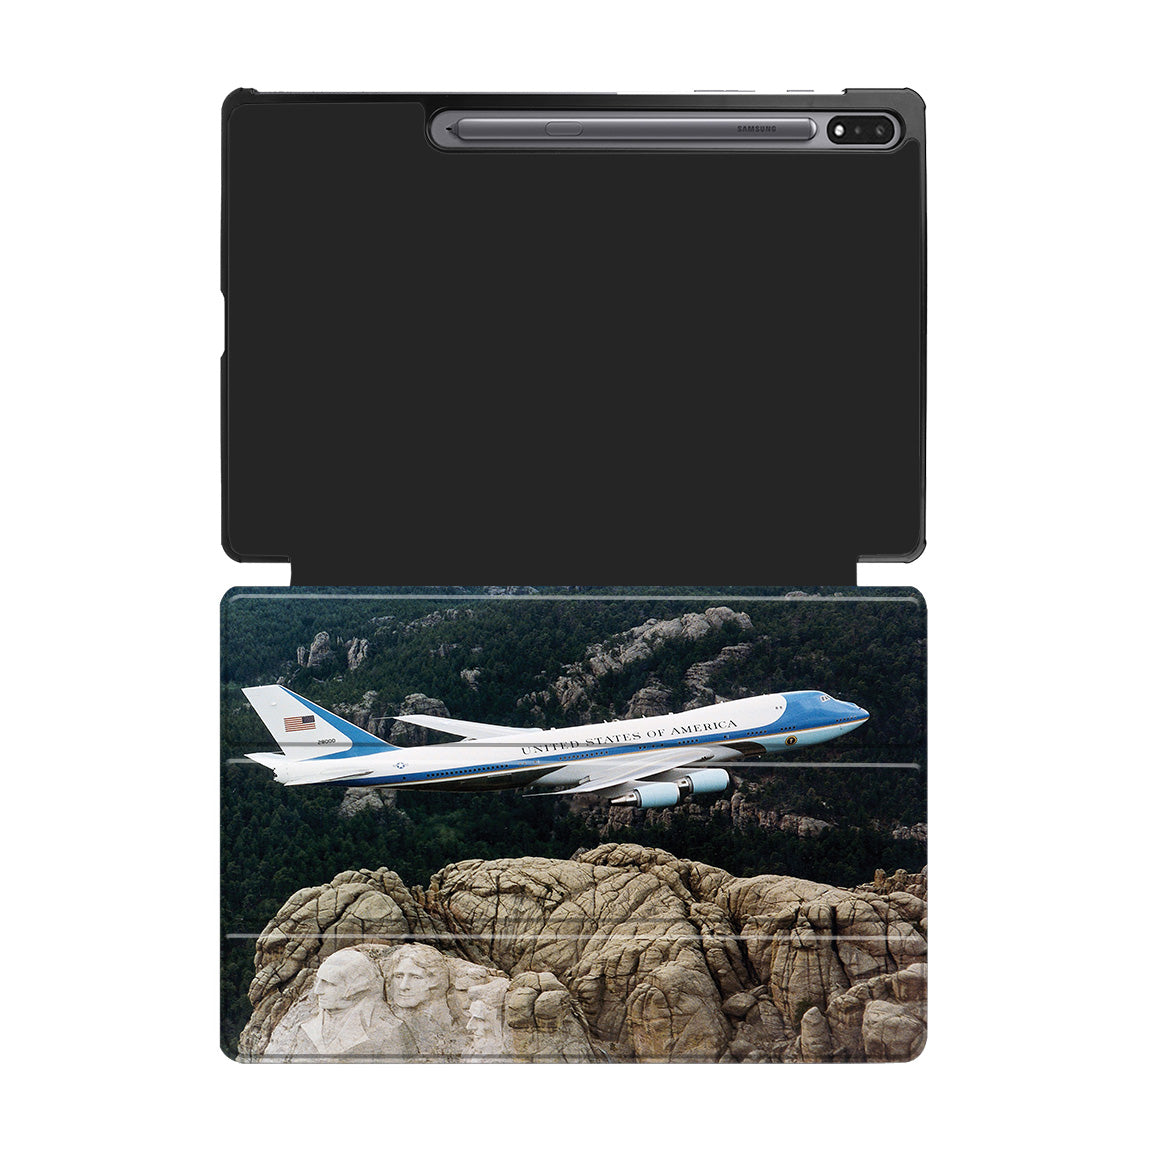 Cruising United States of America Boeing 747 Printed Pillows Designed Samsung Tablet Cases